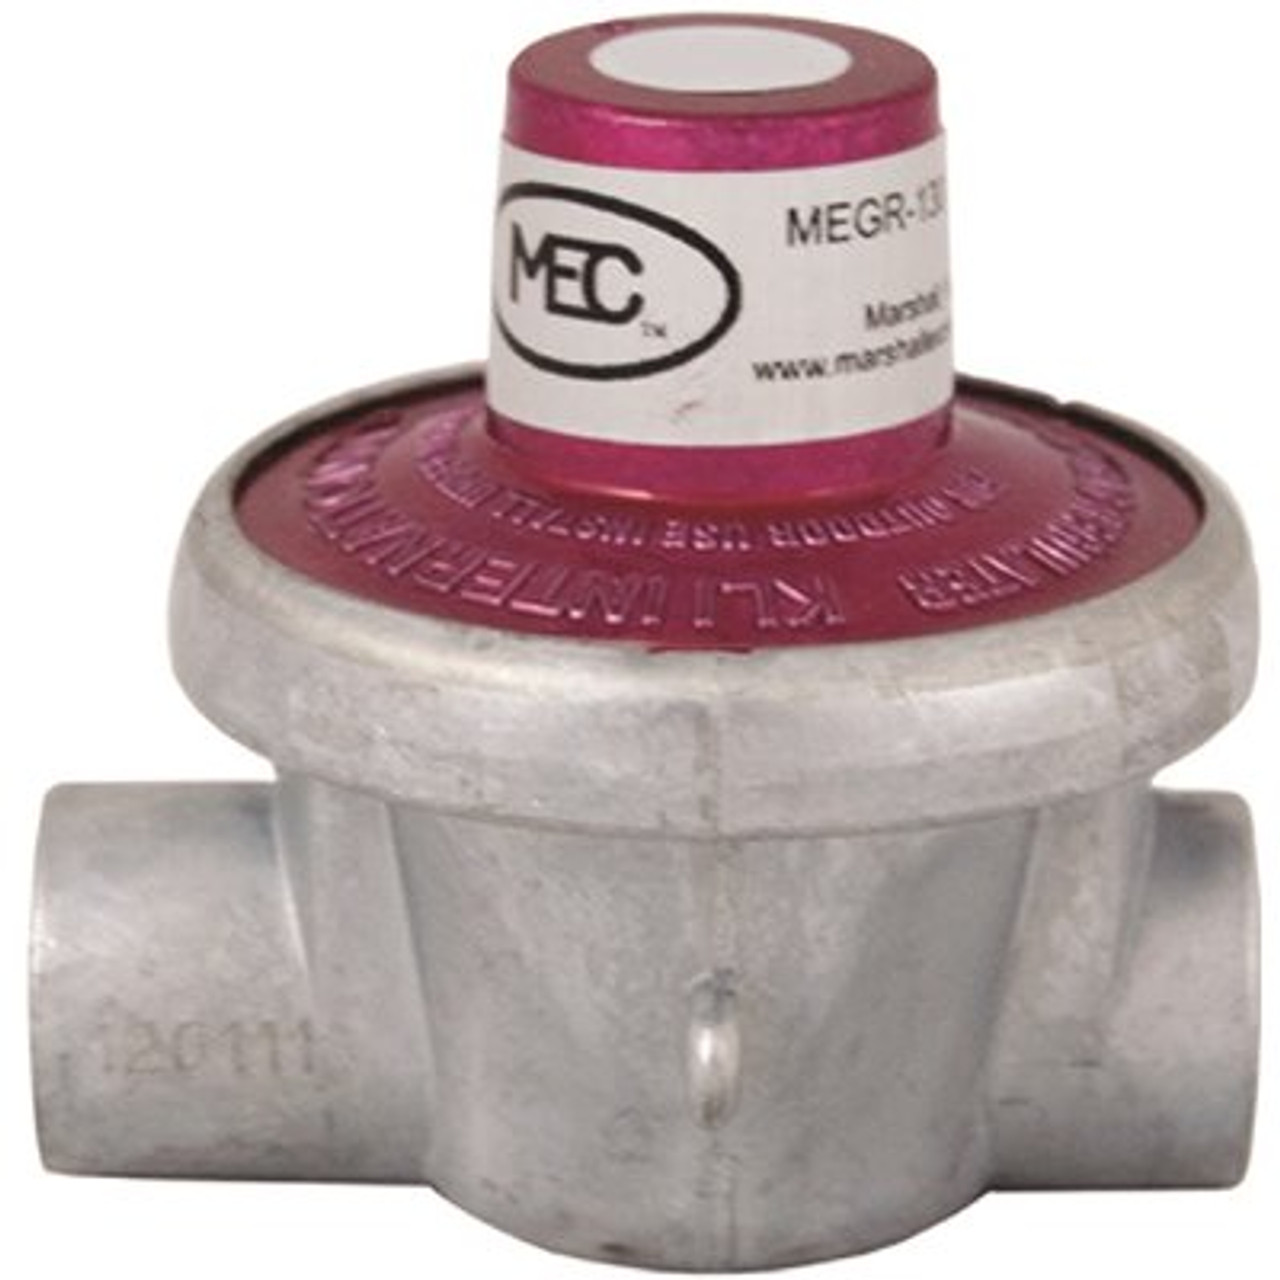 MEC Fixed High Pressure Compact Regulator 5 PSI 1/4 in. FNPT Inlet and Outlet